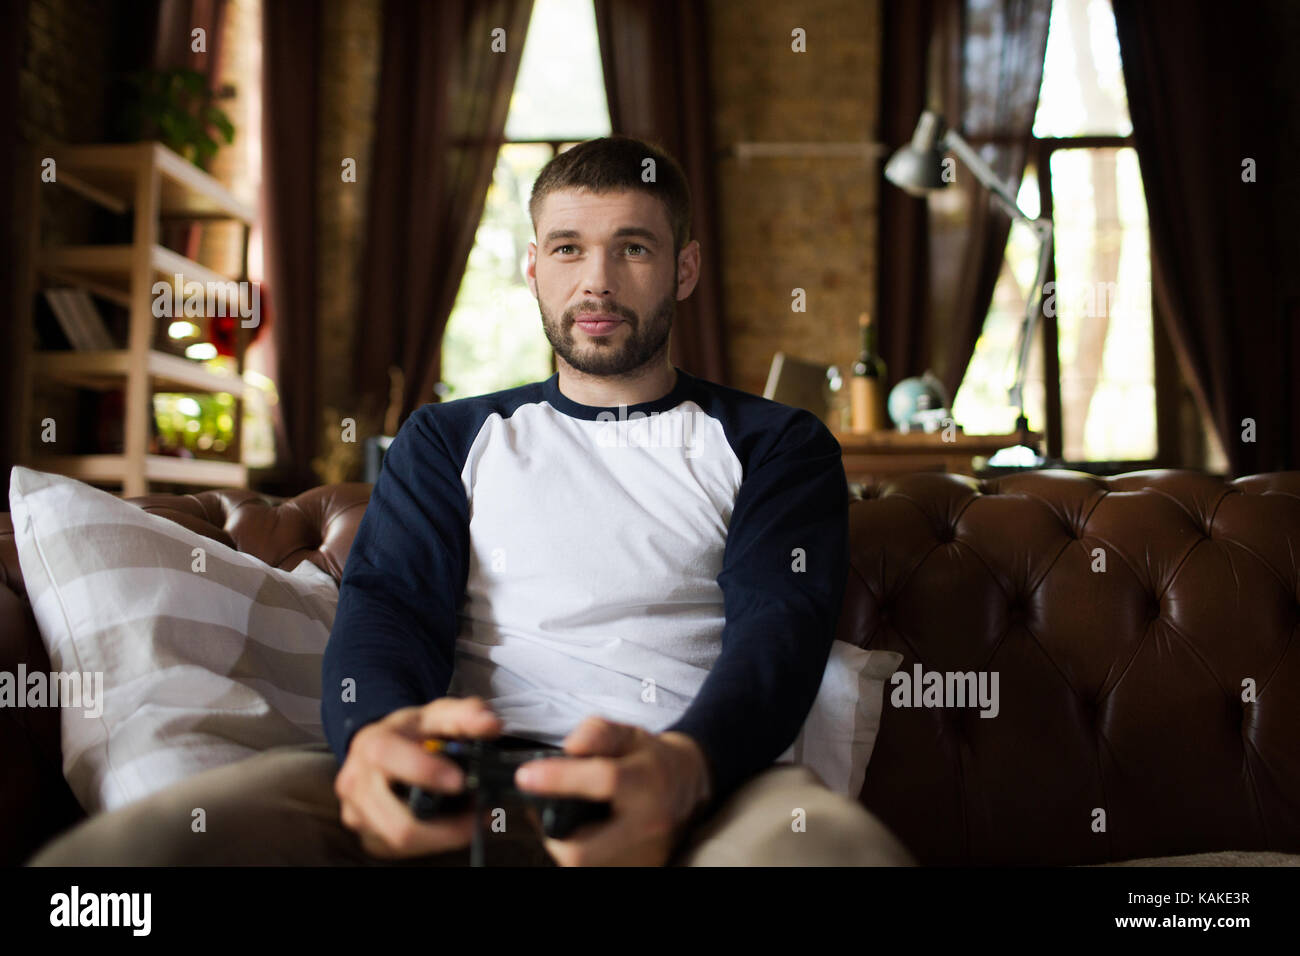 View of young man sitting on couch holding game controller joystick. Stock Photo